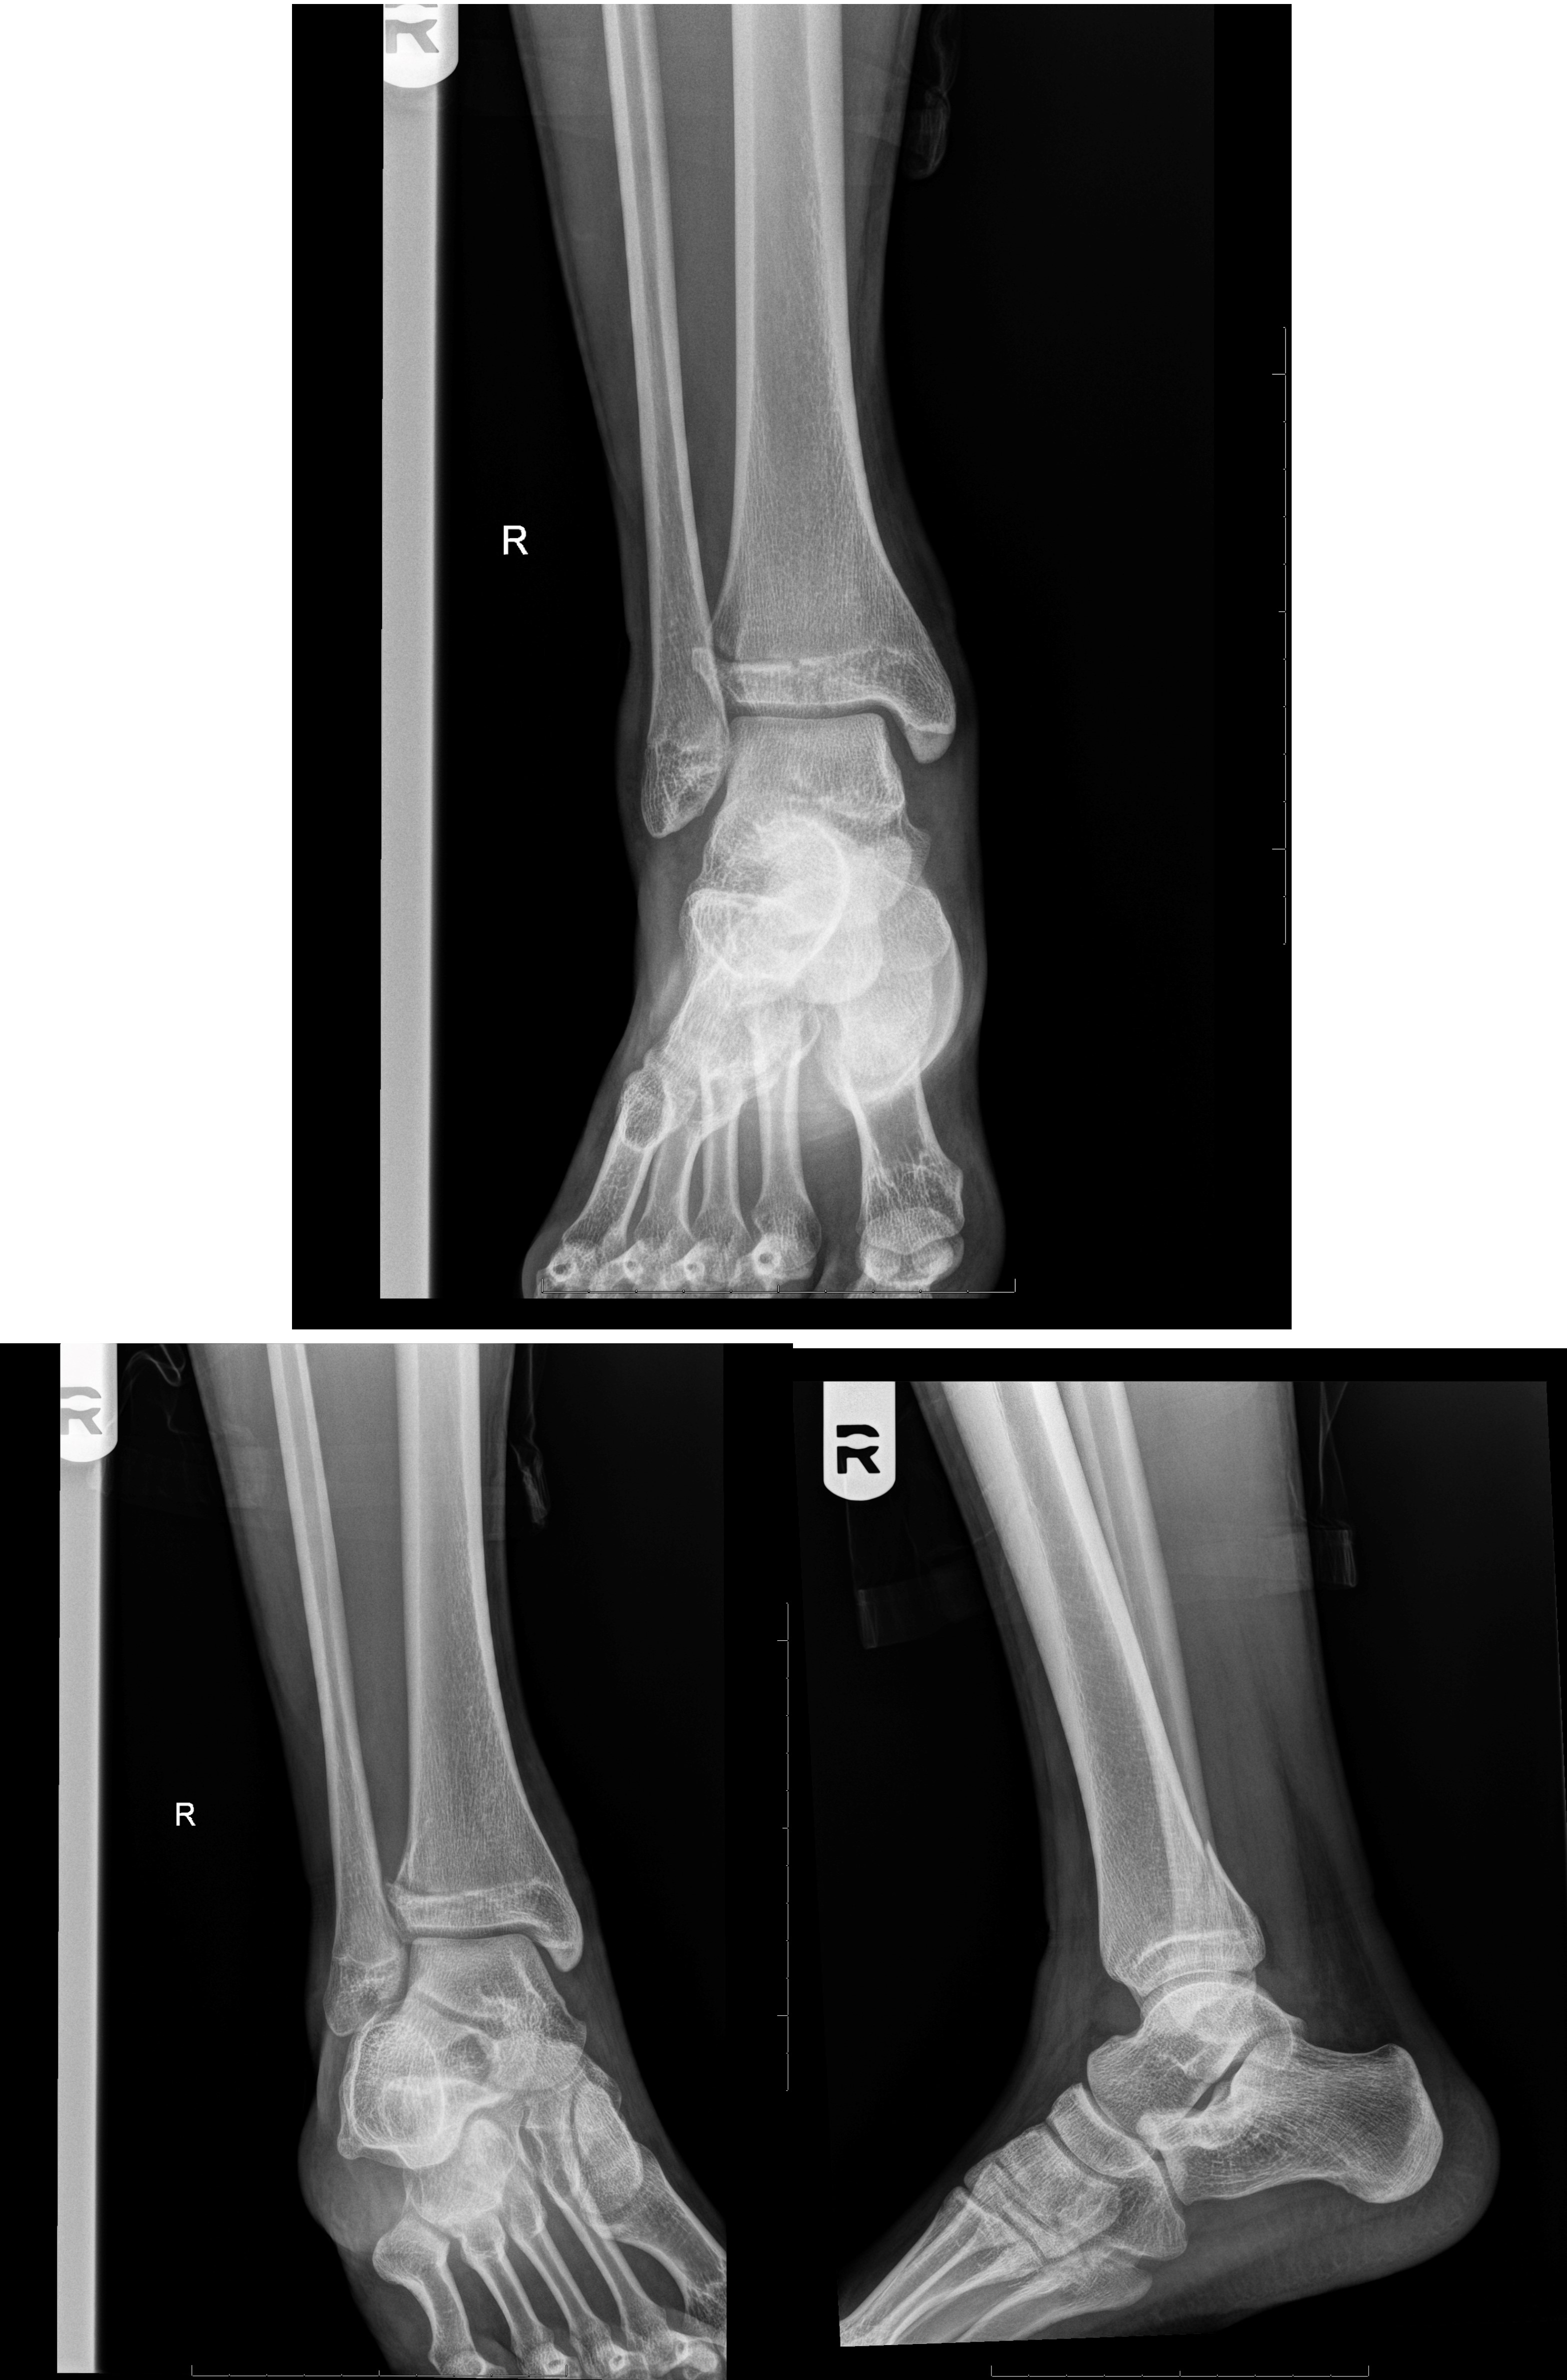 3 views of the ankle demonstrating a vertical fracture component through the distal epiphysis, a transverse fracture componen